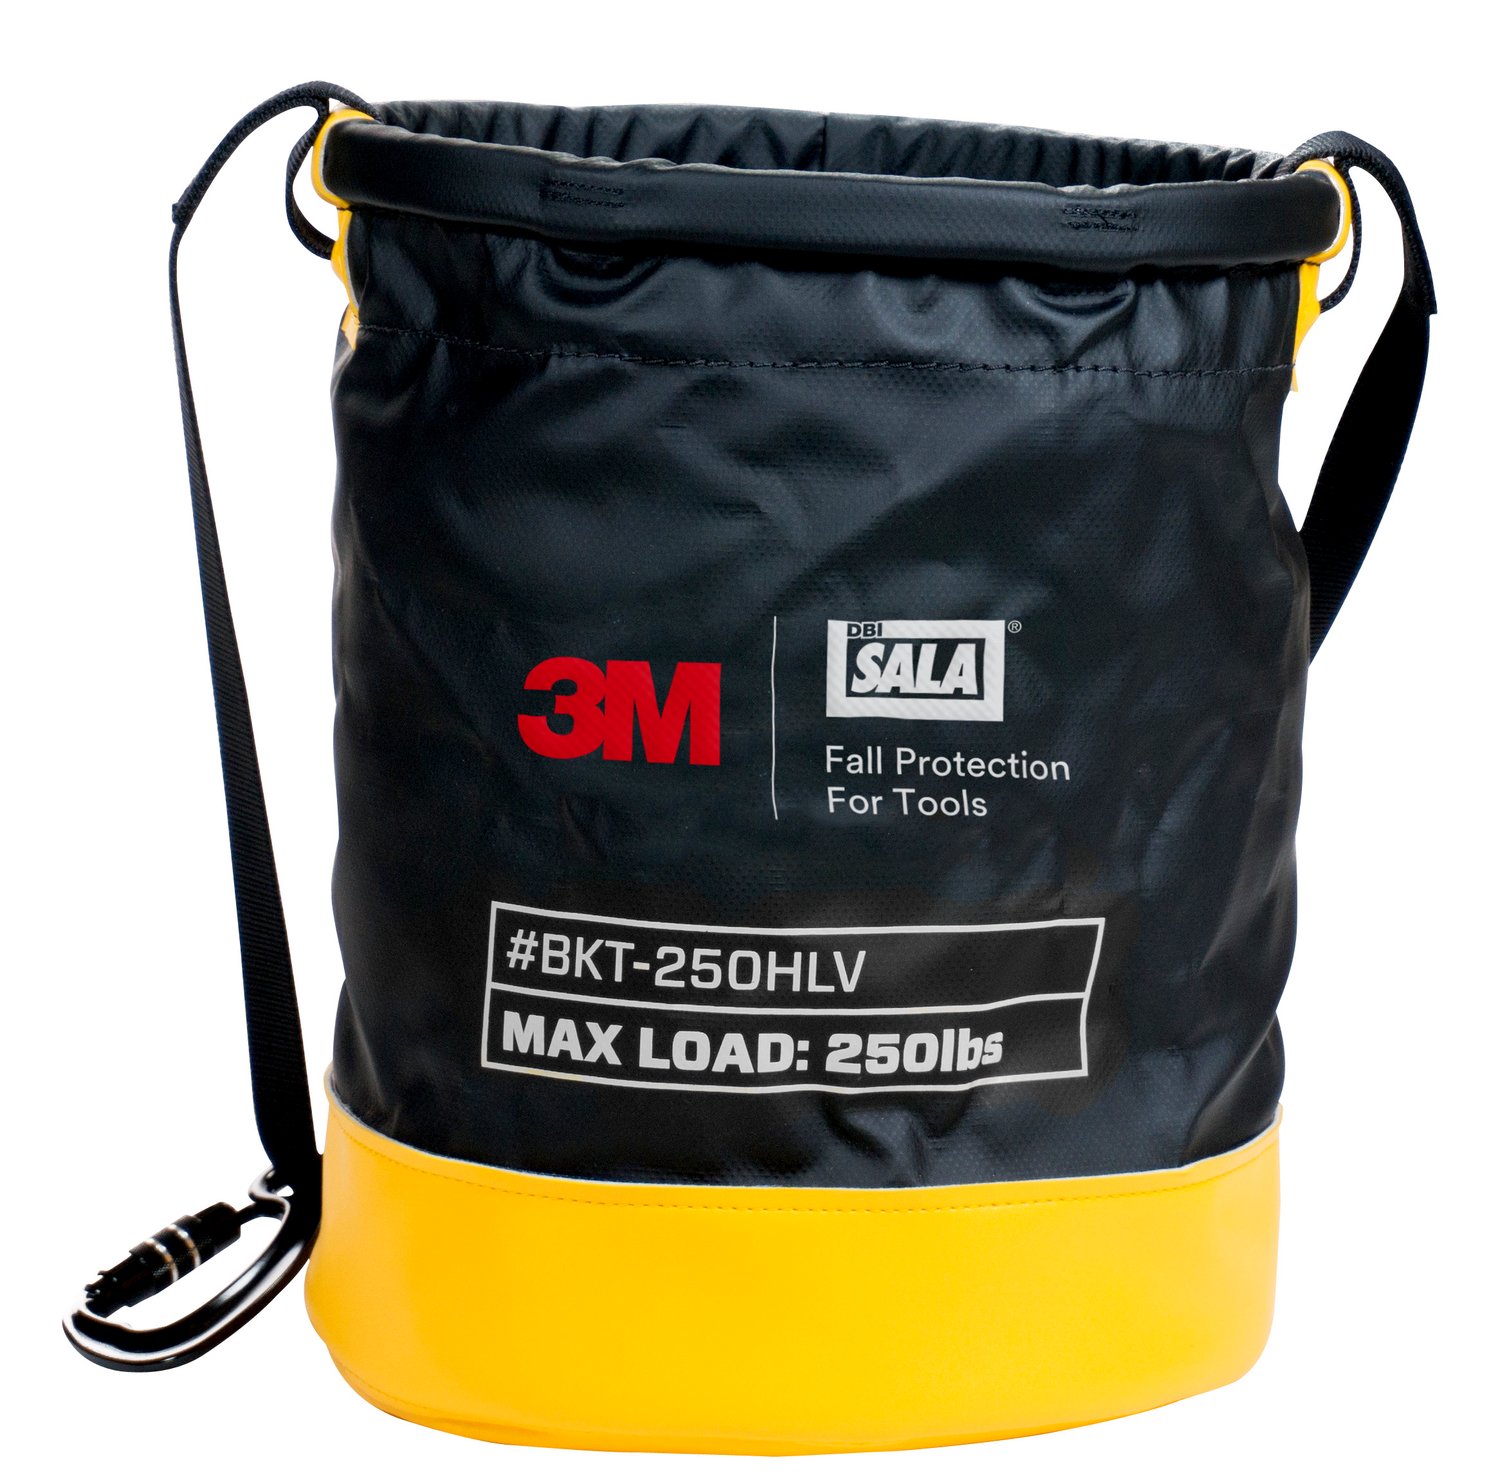 7100241957 - 3M Spill Control Safe Bucket with Hook and Loop Closure 1500140, 250 lb Capacity, Vinyl, 12.5 in dia x 15 in